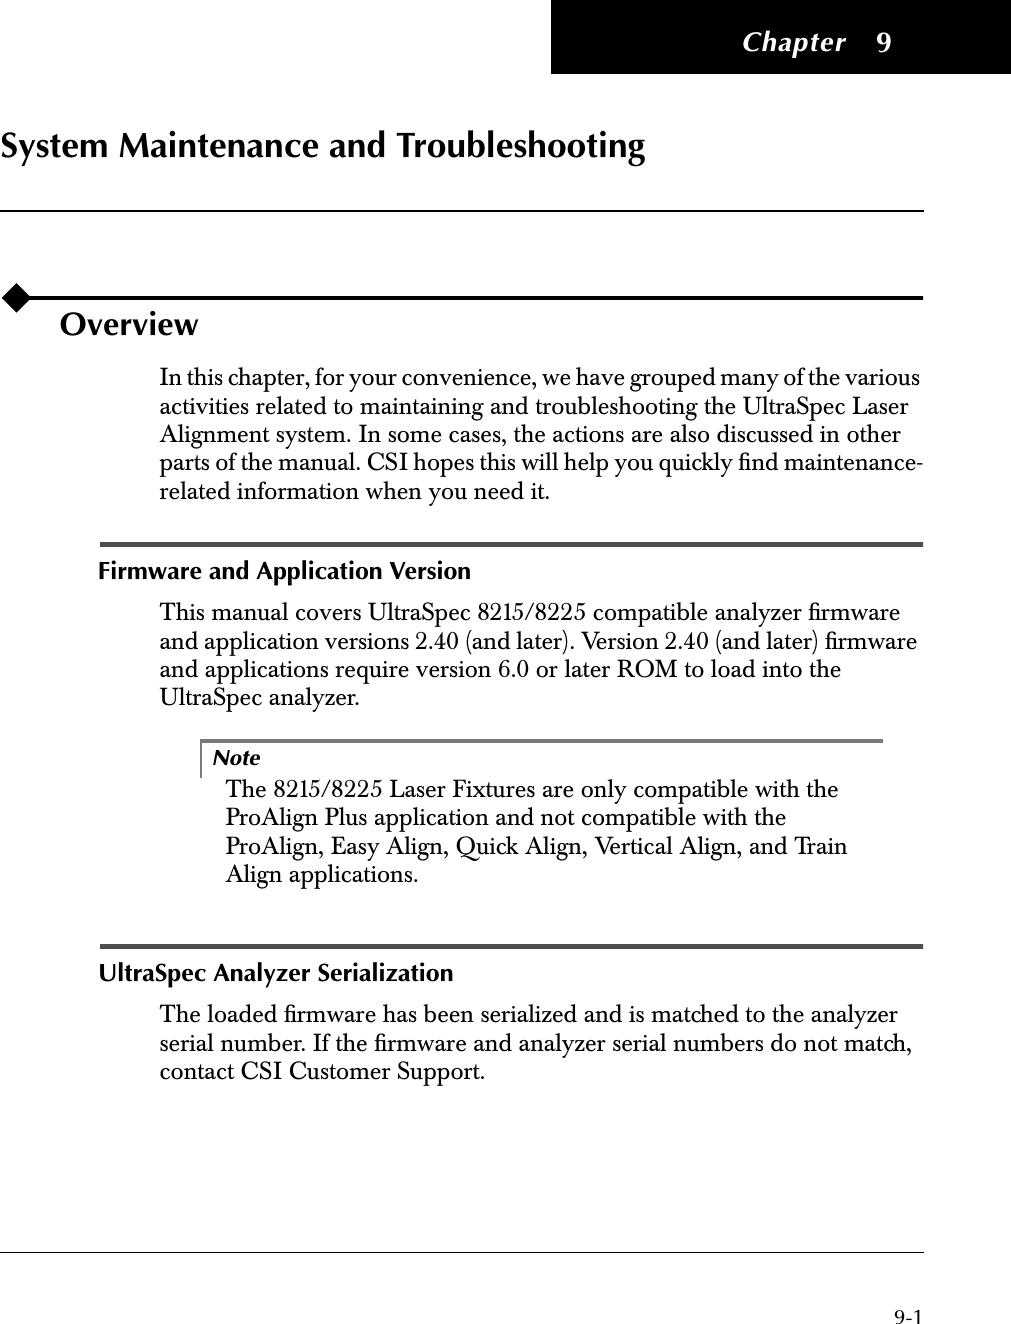  Chapter 9-1 9 System Maintenance and Troubleshooting Overview In this chapter, for your convenience, we have grouped many of the various activities related to maintaining and troubleshooting the UltraSpec Laser Alignment system. In some cases, the actions are also discussed in other parts of the manual. CSI hopes this will help you quickly ﬁnd maintenance-related information when you need it. Firmware and Application Version This manual covers UltraSpec 8215/8225 compatible analyzer ﬁrmware and application versions 2.40 (and later). Version 2.40 (and later) ﬁrmware and applications require version 6.0 or later ROM to load into the UltraSpec analyzer.Note The 8215/8225 Laser Fixtures are only compatible with the ProAlign Plus application and not compatible with the ProAlign, Easy Align, Quick Align, Vertical Align, and Train Align applications. UltraSpec Analyzer Serialization The loaded ﬁrmware has been serialized and is matched to the analyzer serial number. If the ﬁrmware and analyzer serial numbers do not match, contact CSI Customer Support. 22